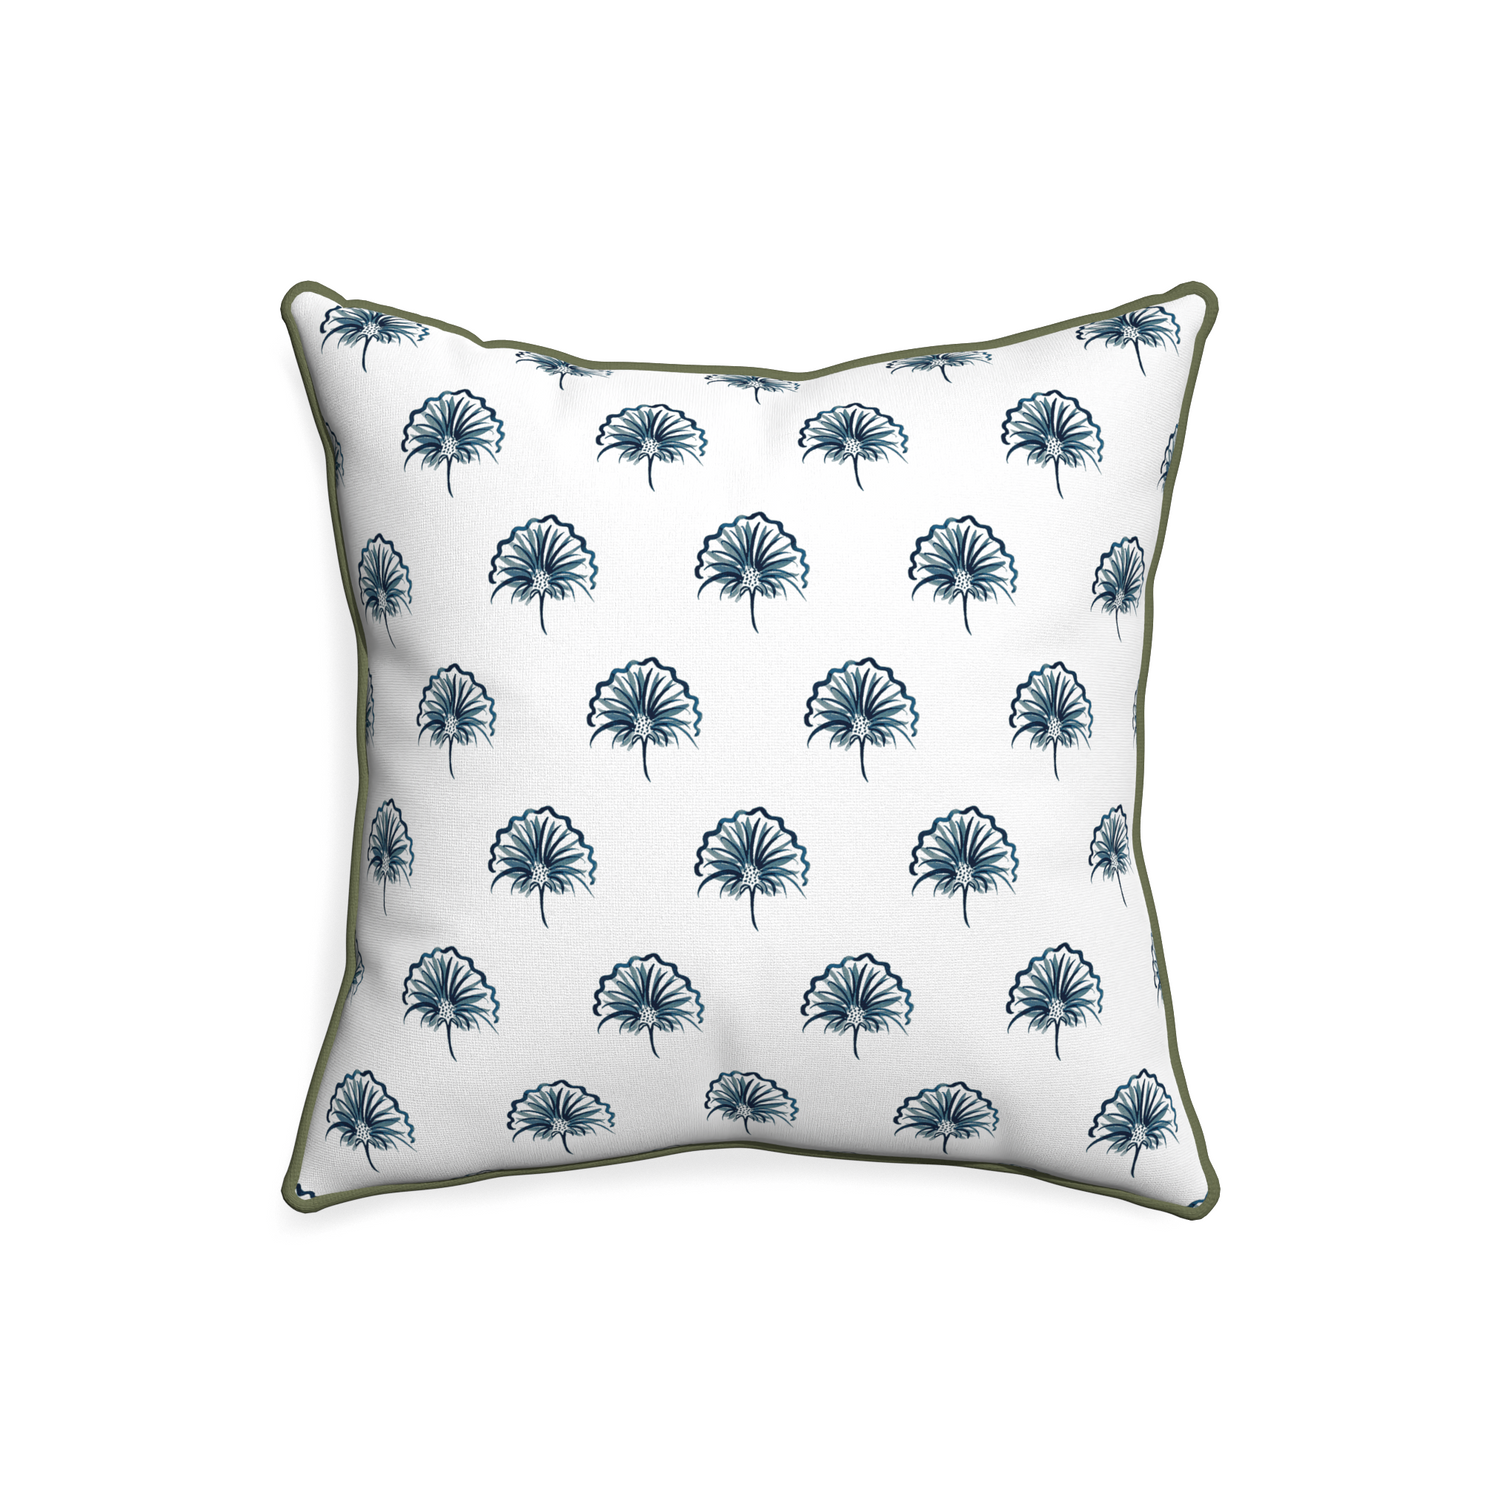 20-square penelope midnight custom floral navypillow with f piping on white background